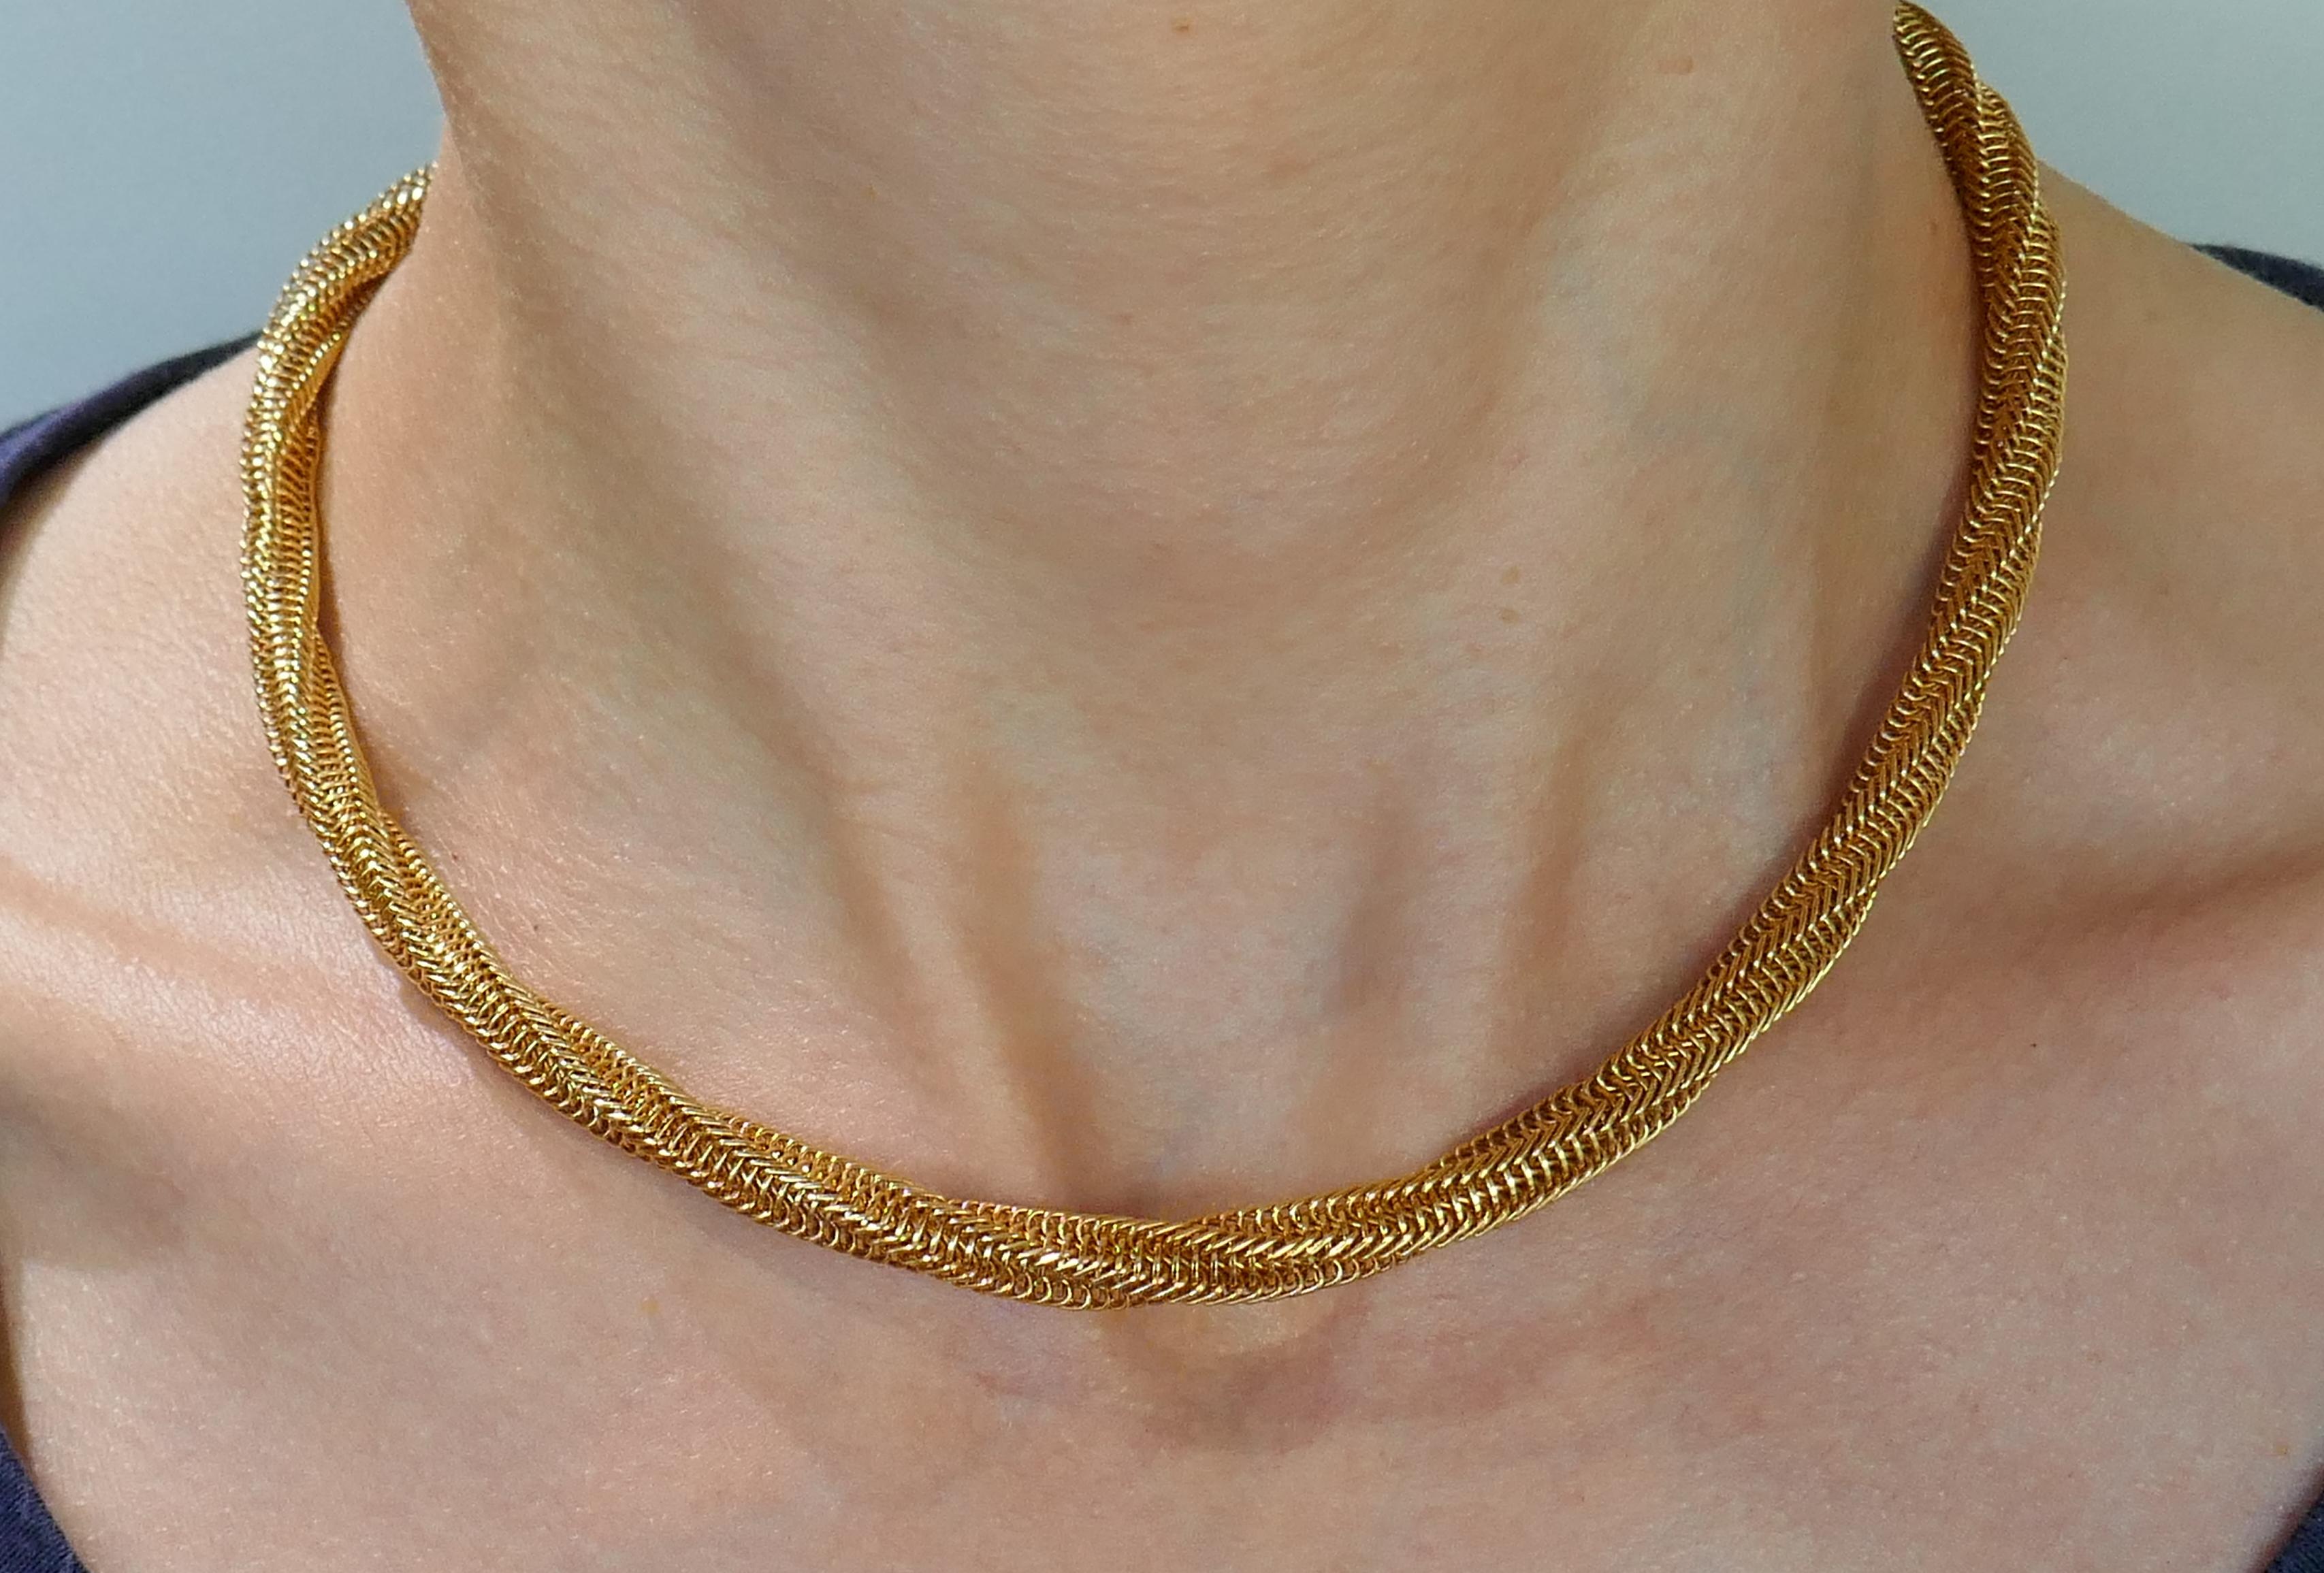 Classy necklace created by Van Cleef & Arpels in the 1960s. Elegant, timeless and wearable, the chain is a great addition to your jewelry collection.
Made of 18 karat (tested) yellow gold. 
Measures 16 x 1/4 inches (40.5 x 0.7 cm) and weighs 37.2